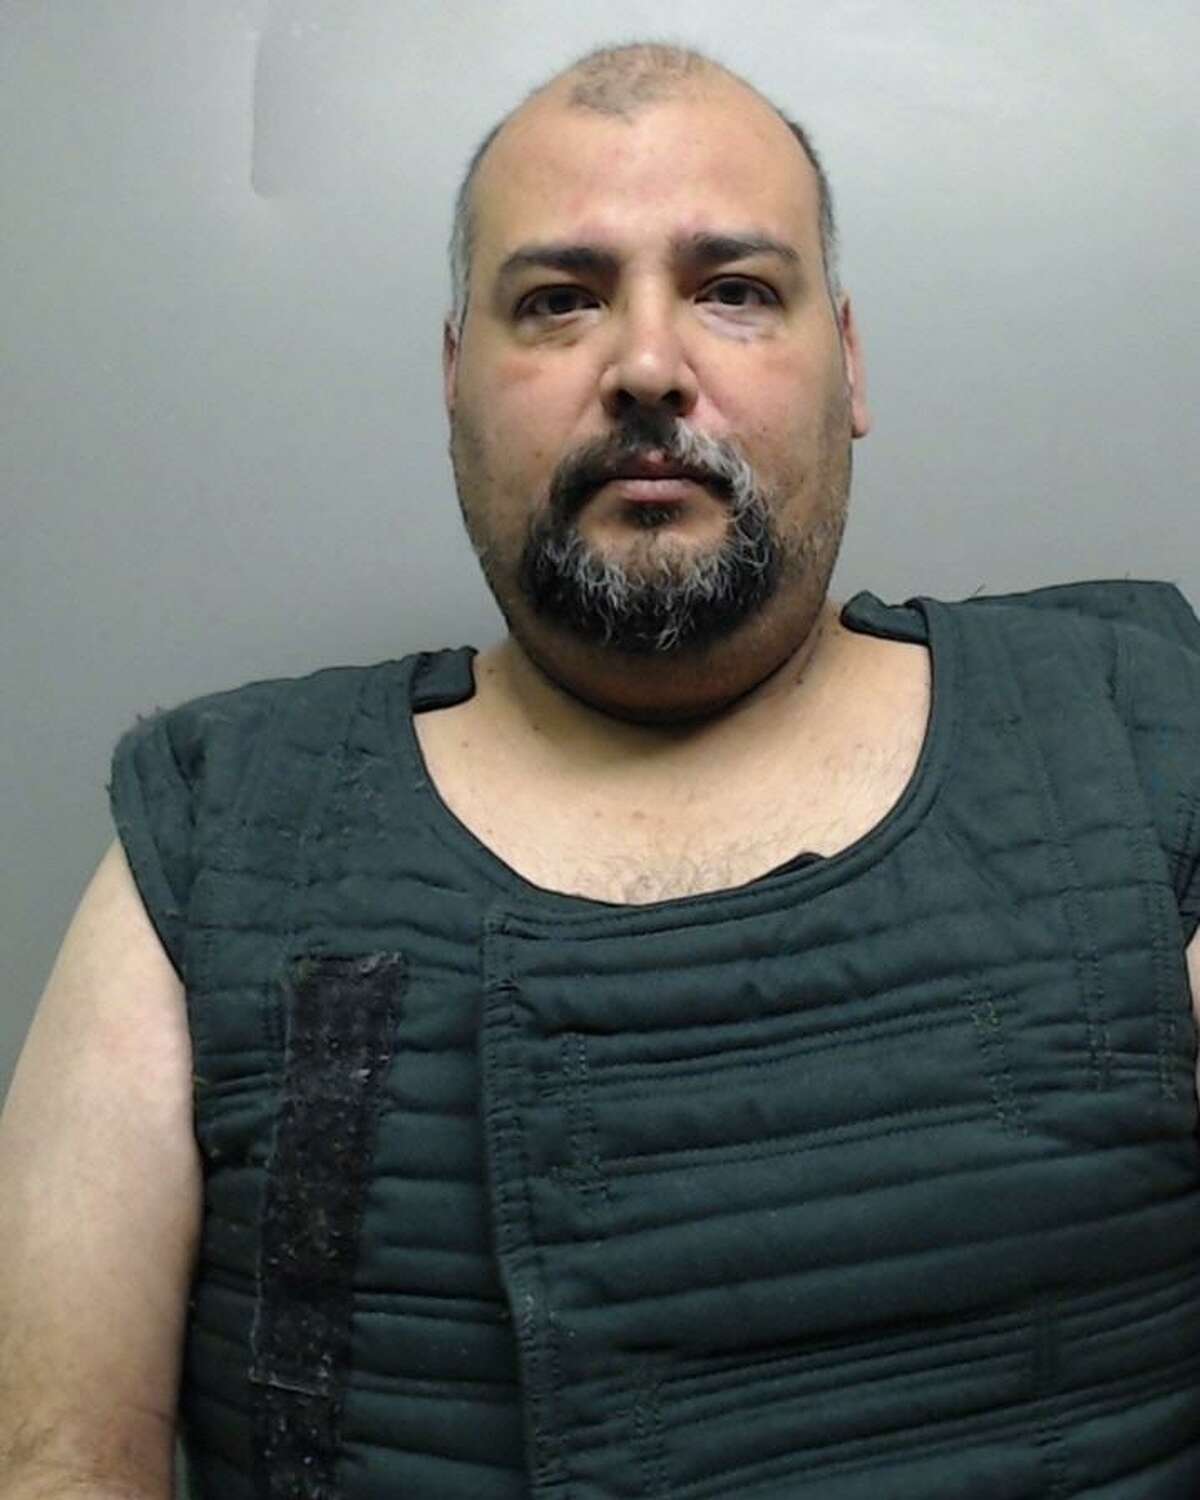 Carlos Romo, 42, is facing a possession of child pornography charge.